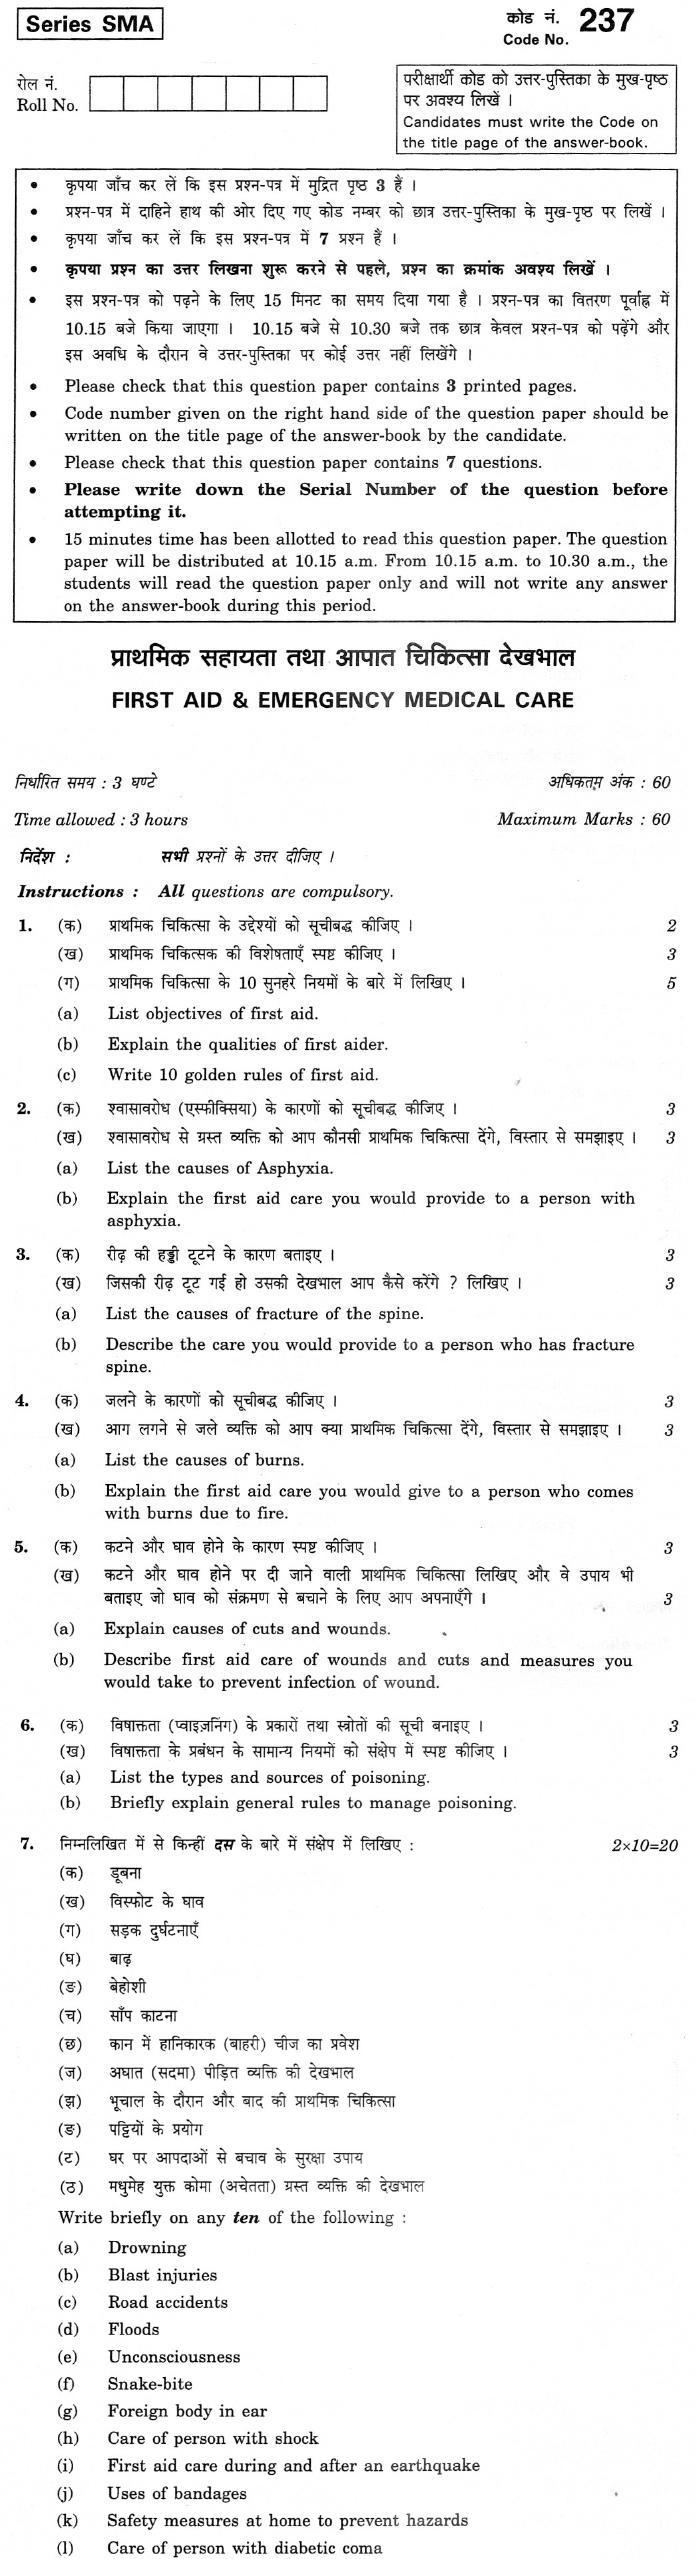 CBSE Class XII Previous Year Question Paper 2012 First Aid & Emergency Medical Care